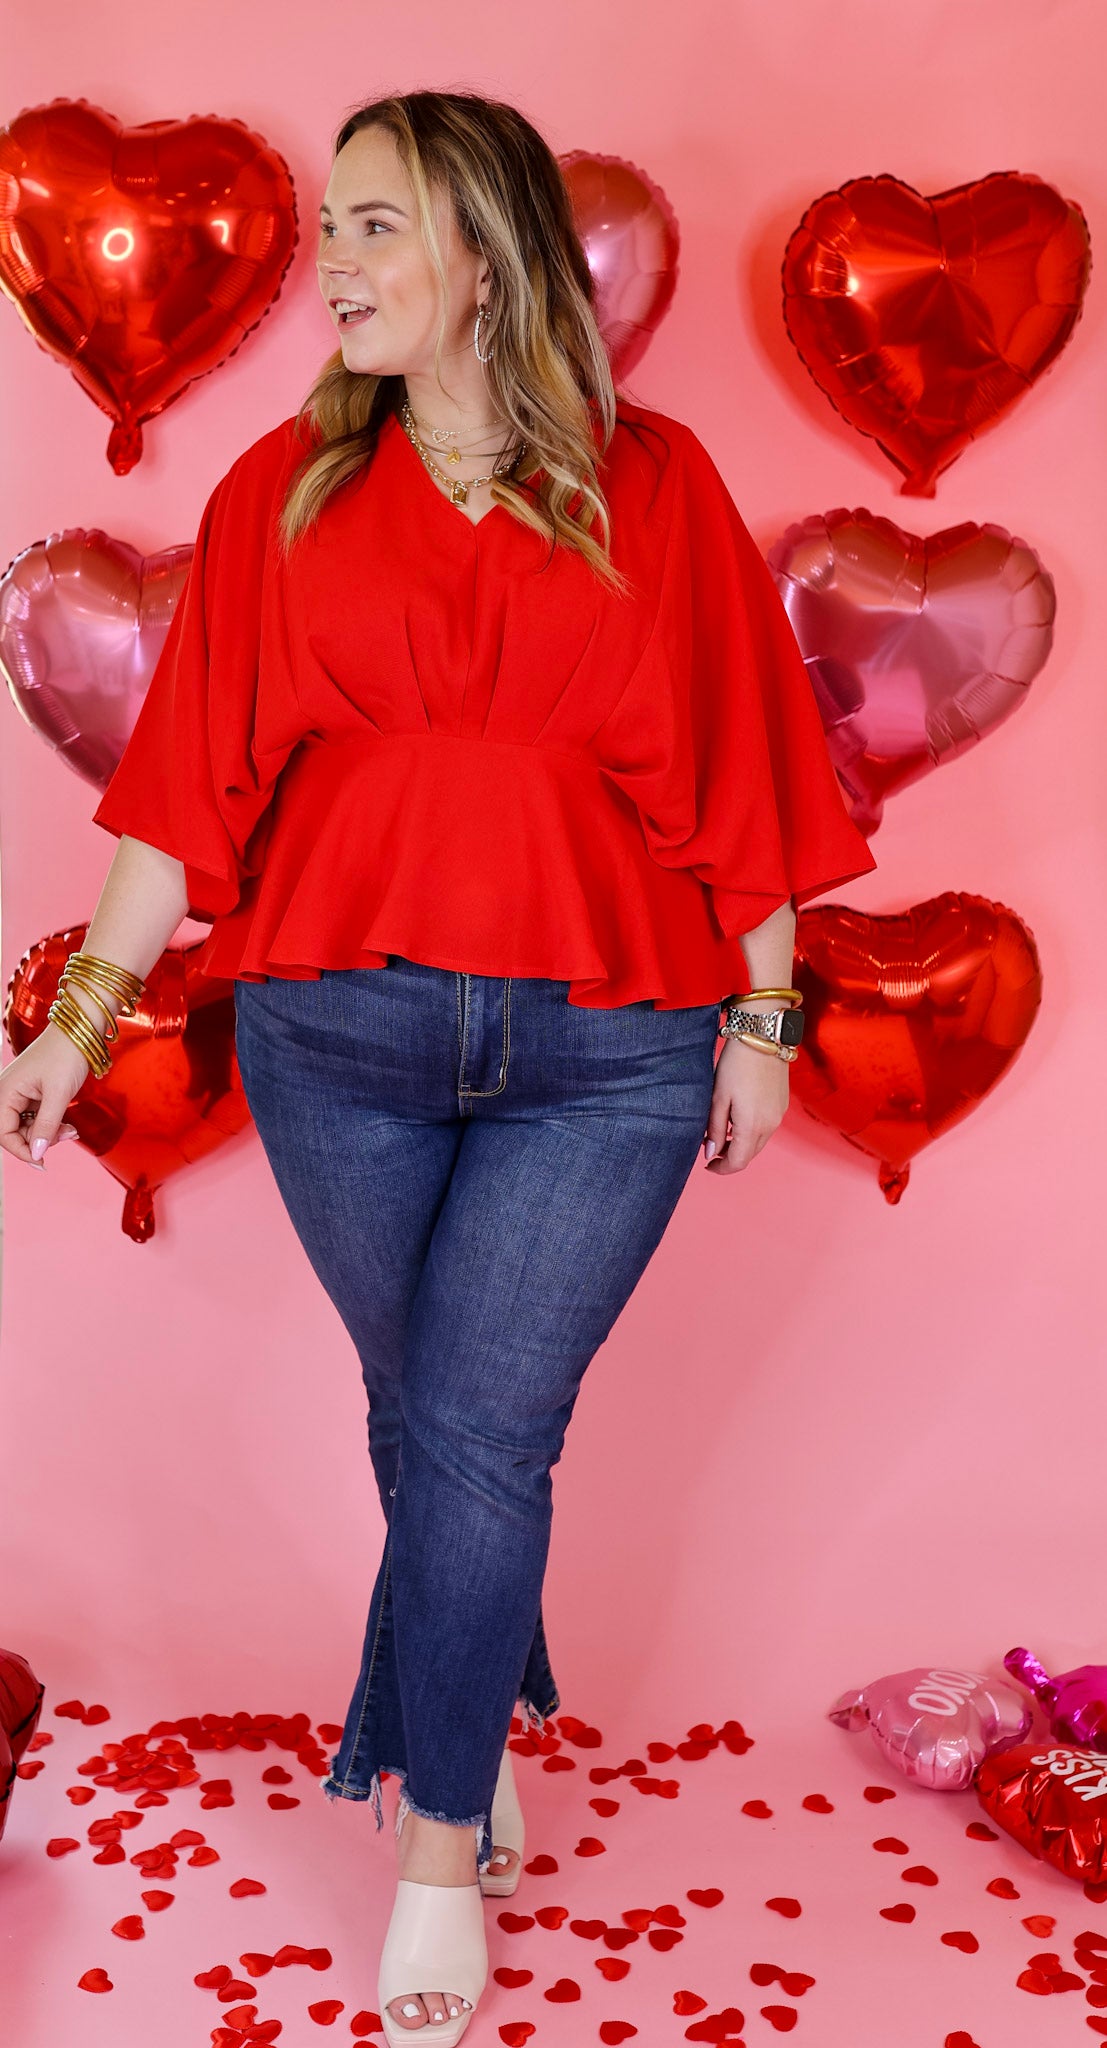 Hear the Music Drop Sleeve V Neck Peplum Top in Red - Giddy Up Glamour Boutique